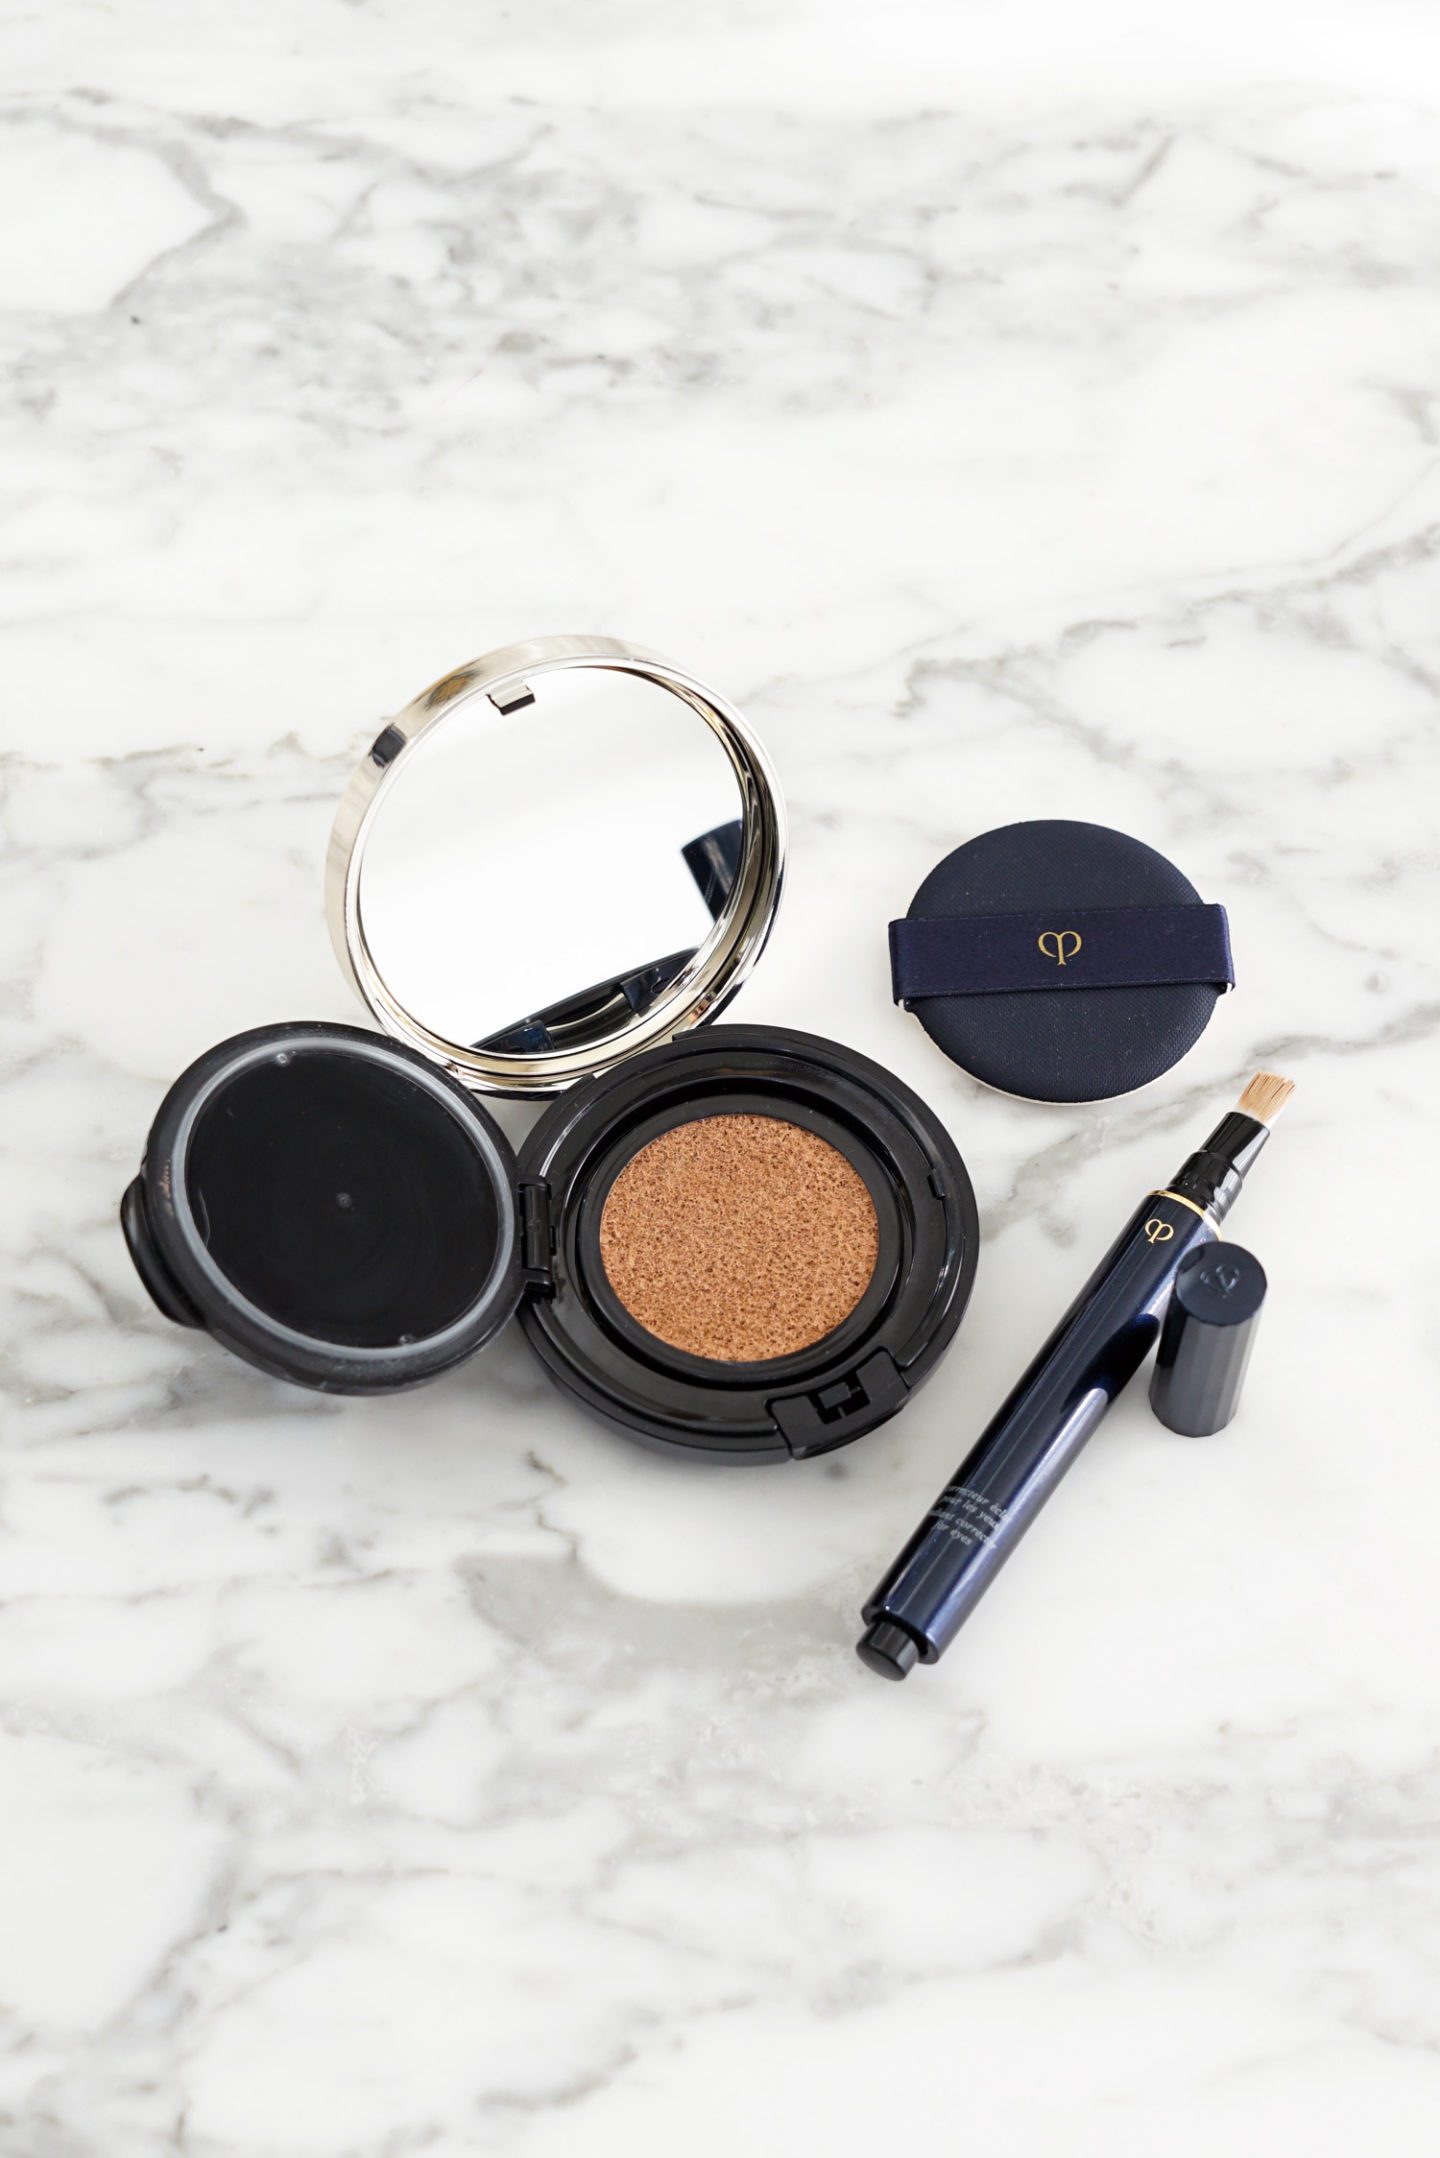 Cle de Peau Radiant Cushion Foundation in O30 and Corrector for Eyes in Ocher | The Beauty Look Book